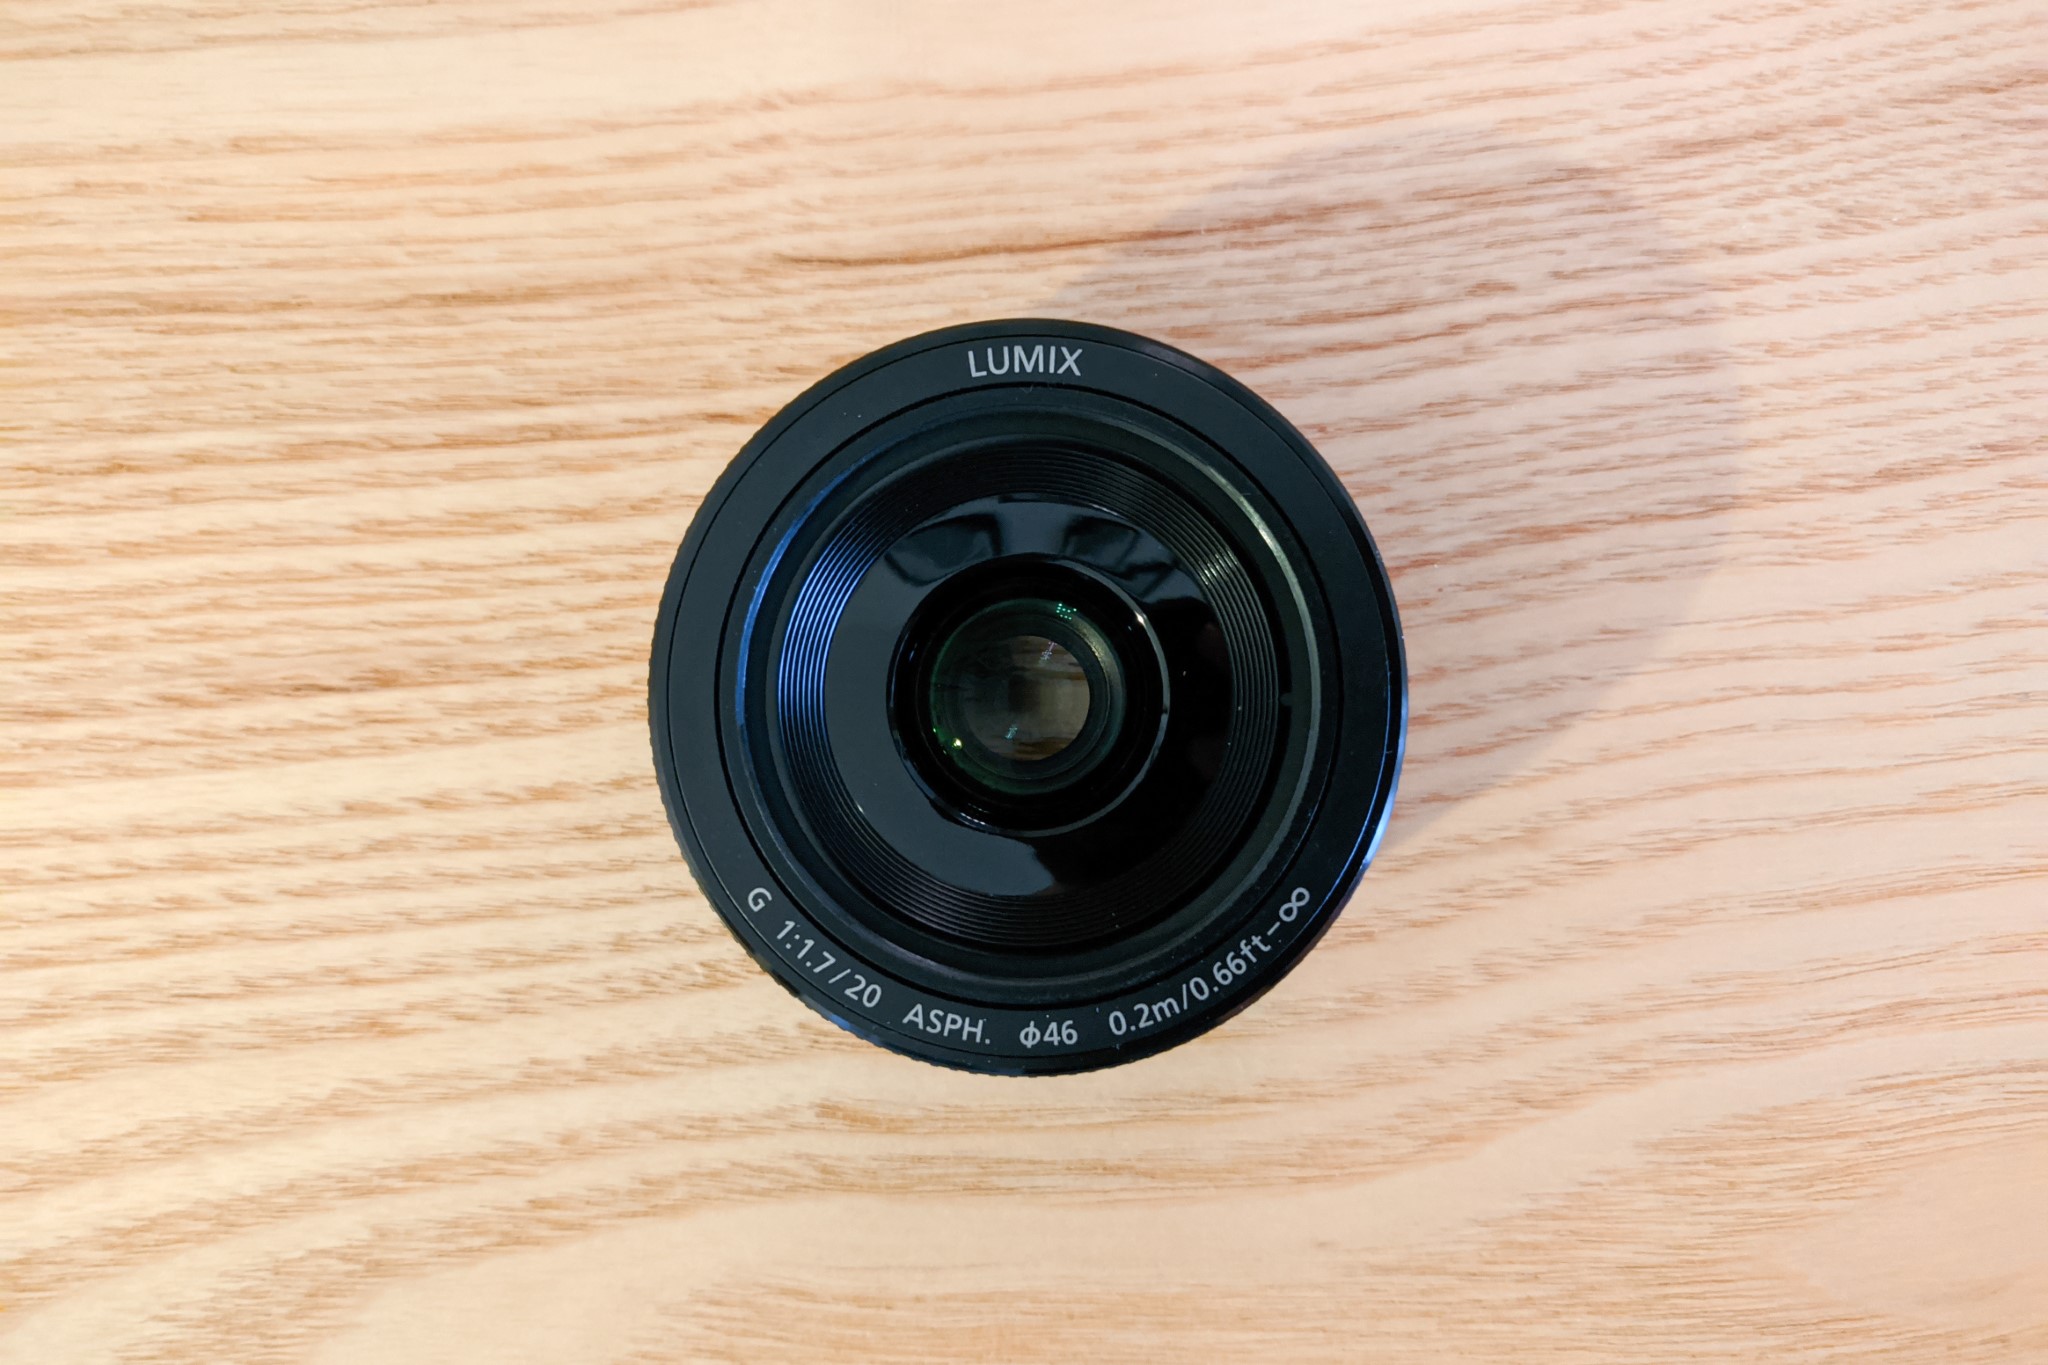 About That 20mm Lens…